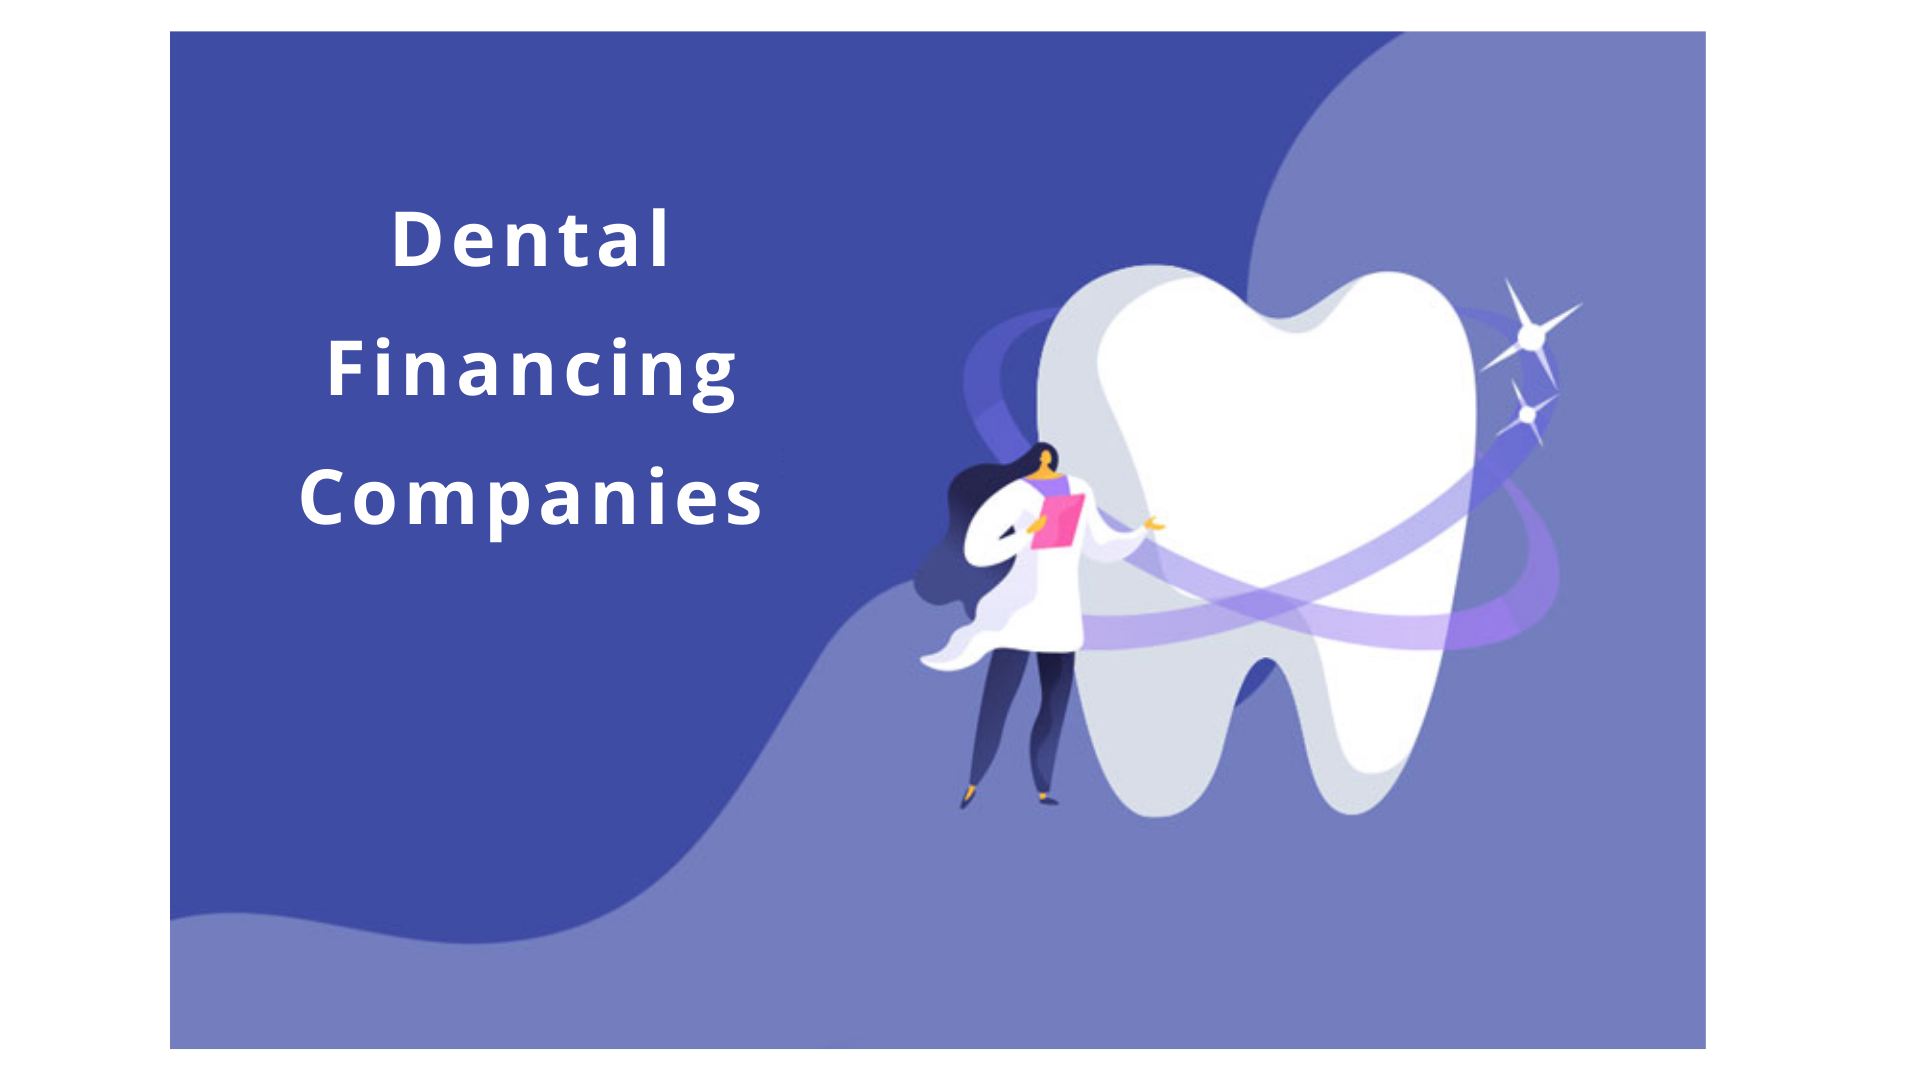 Dental Financing Companies: How to Compare [2021 Guide]